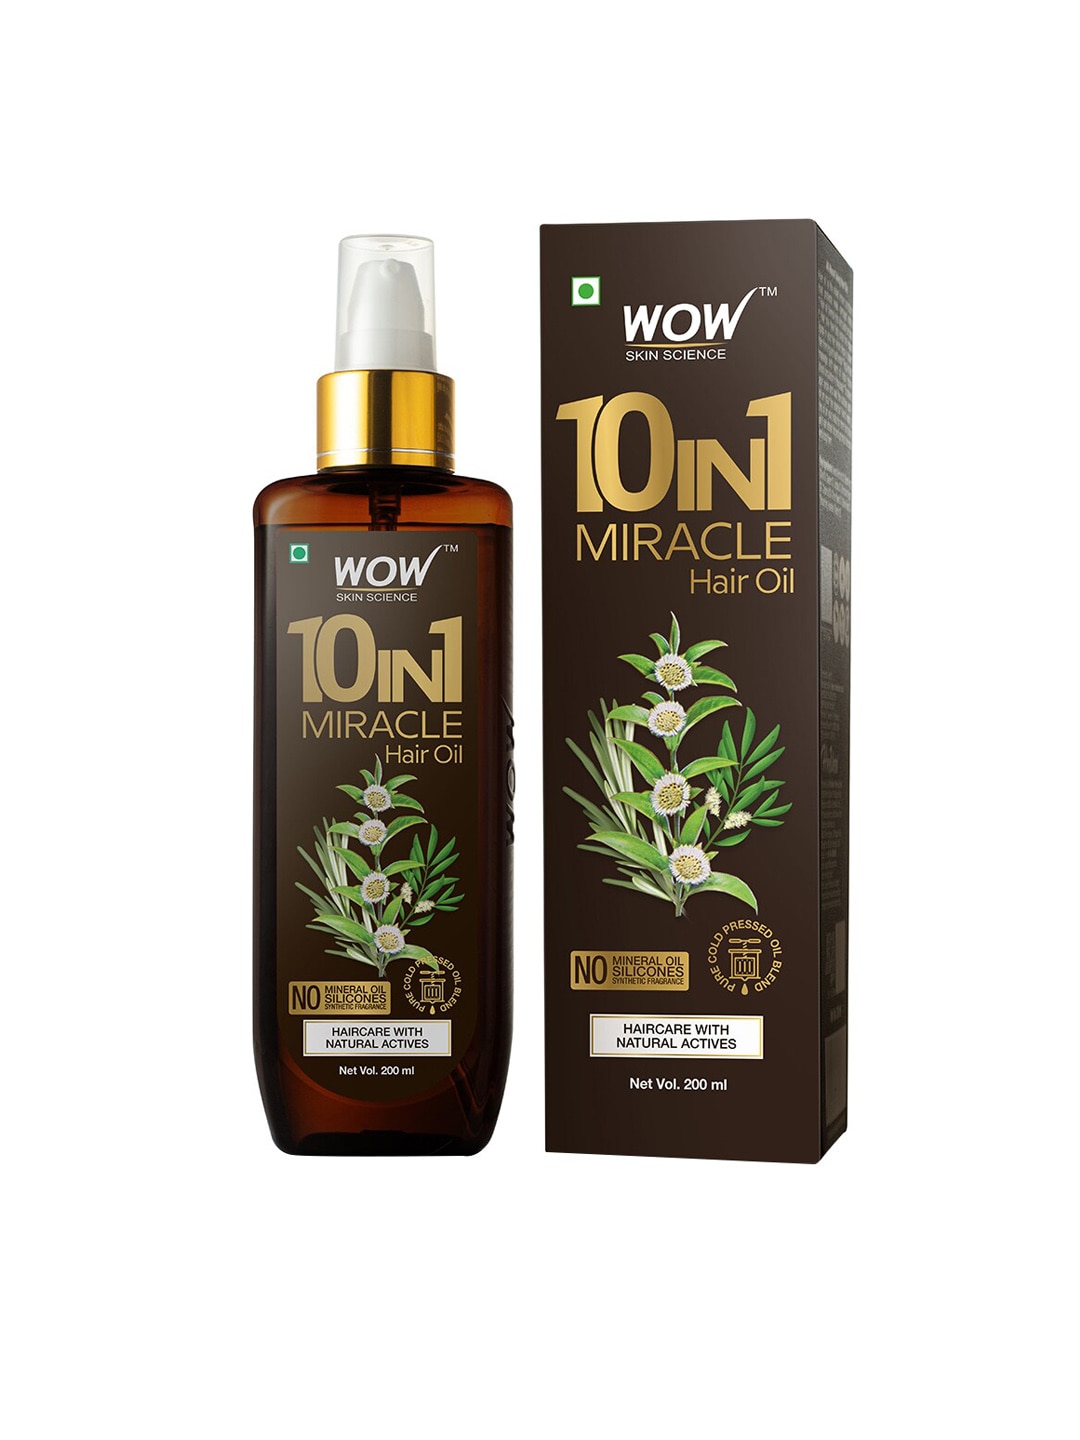 WOW Skin Science 10-in-1 Miracle Hair Oil 200 ml Price in India